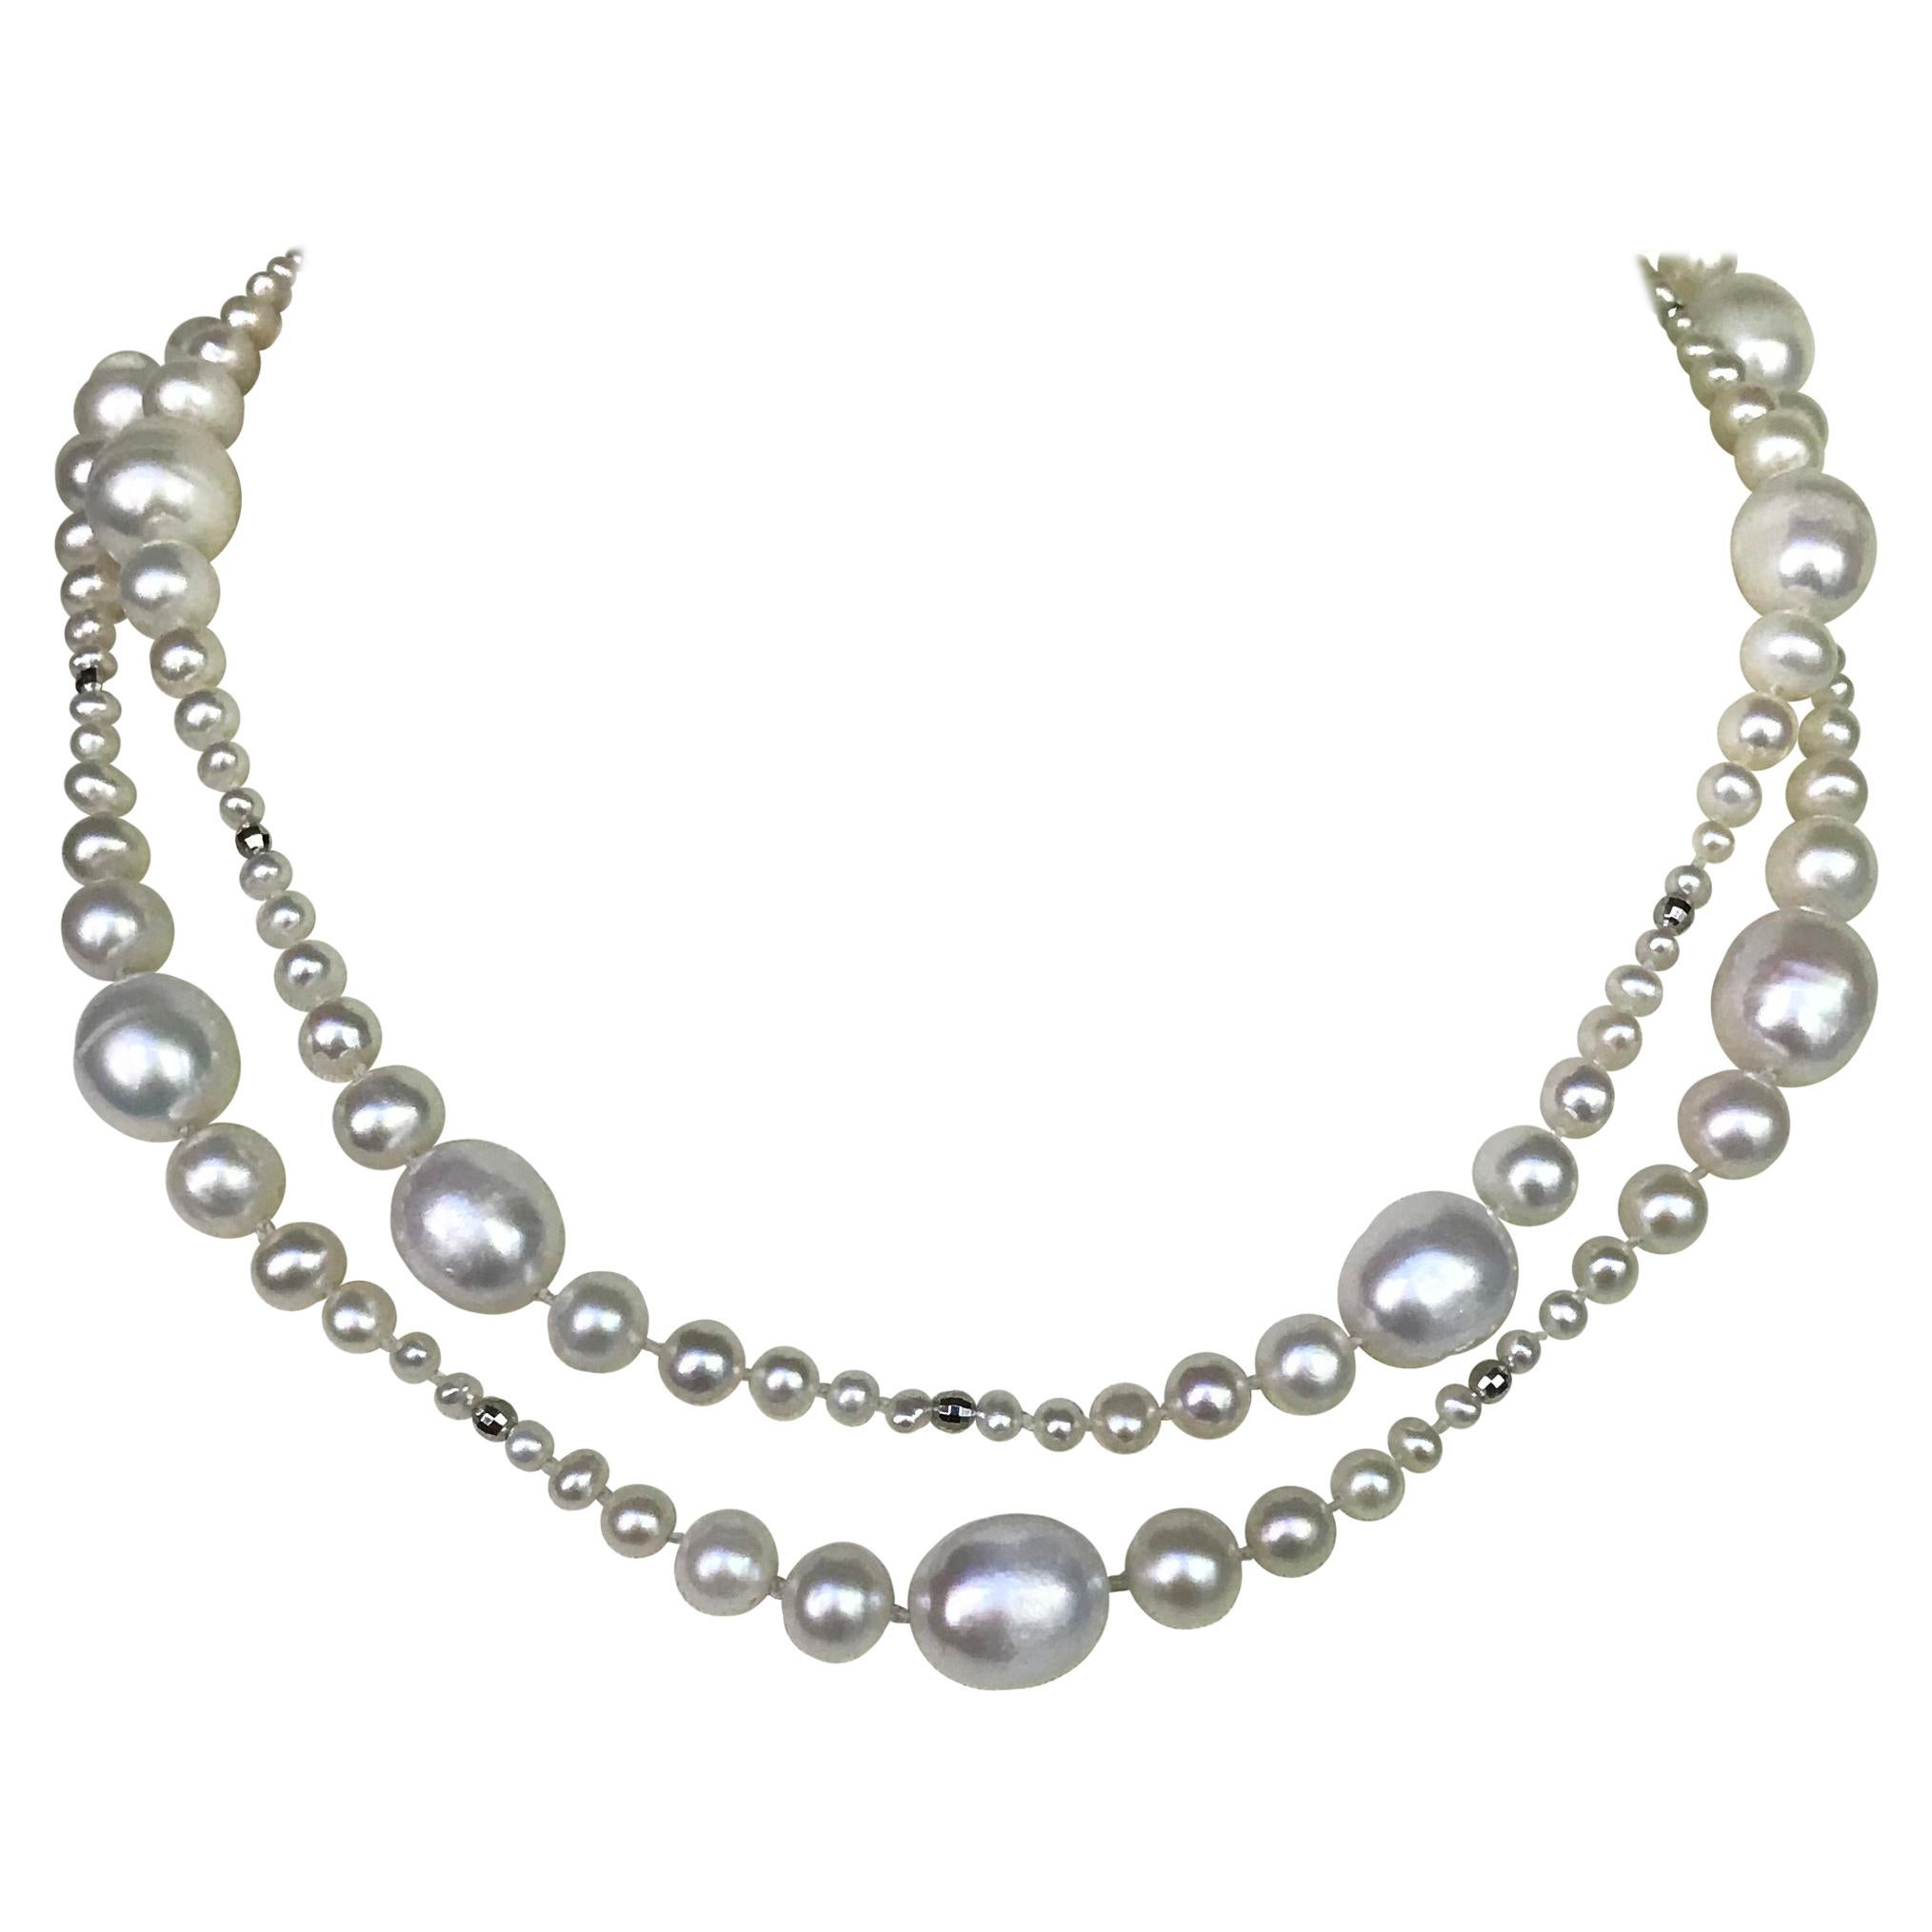 Marina J Multi-Graduated White Pearl Long Necklace with White Gold Clasp & Beads